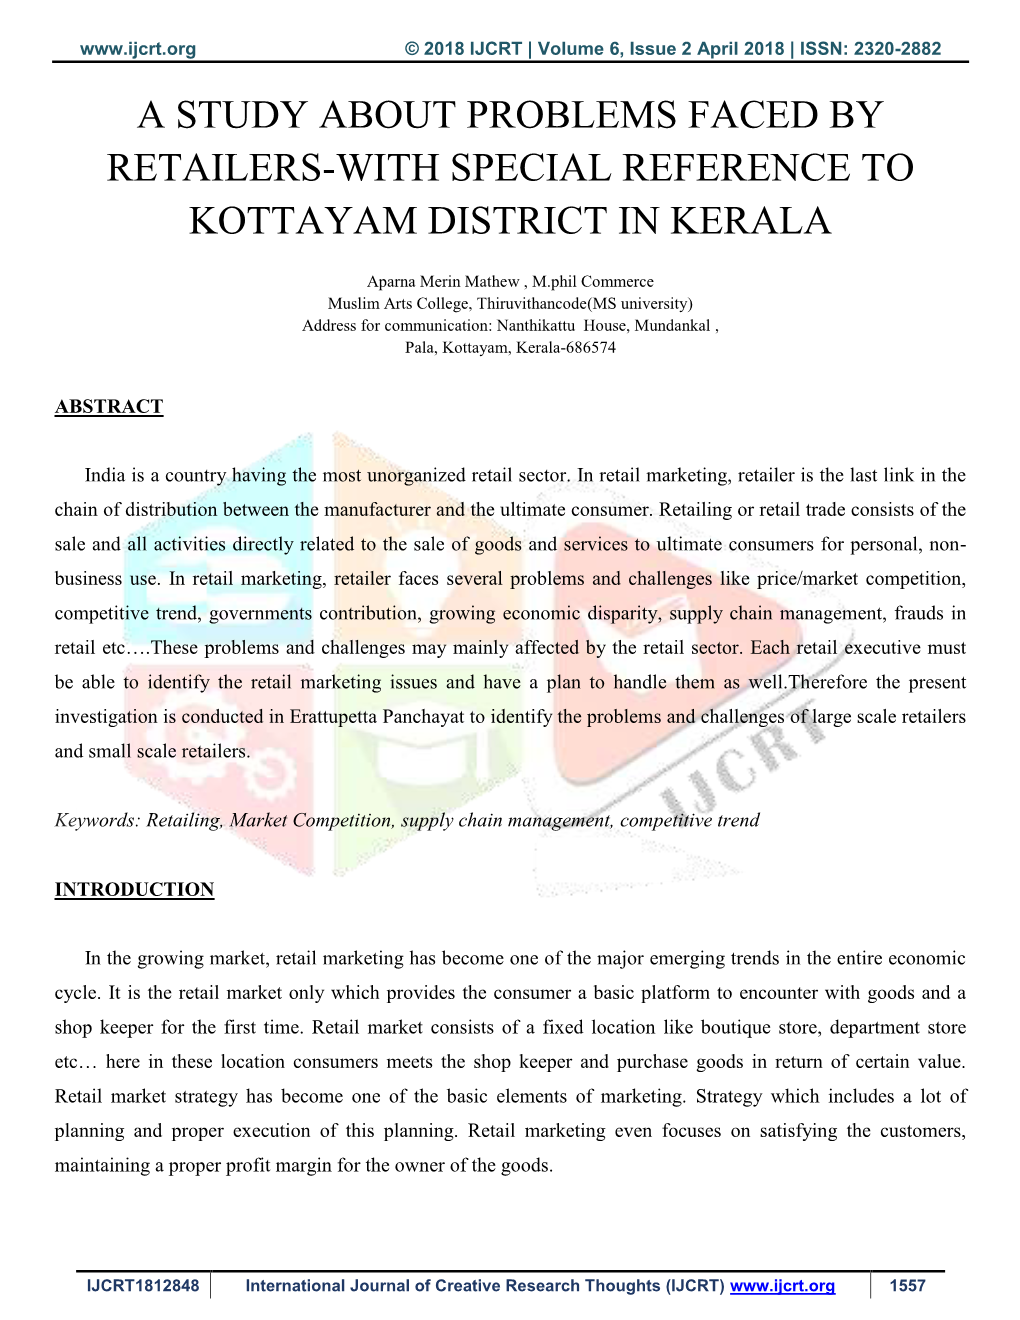 A Study About Problems Faced by Retailers-With Special Reference to Kottayam District in Kerala